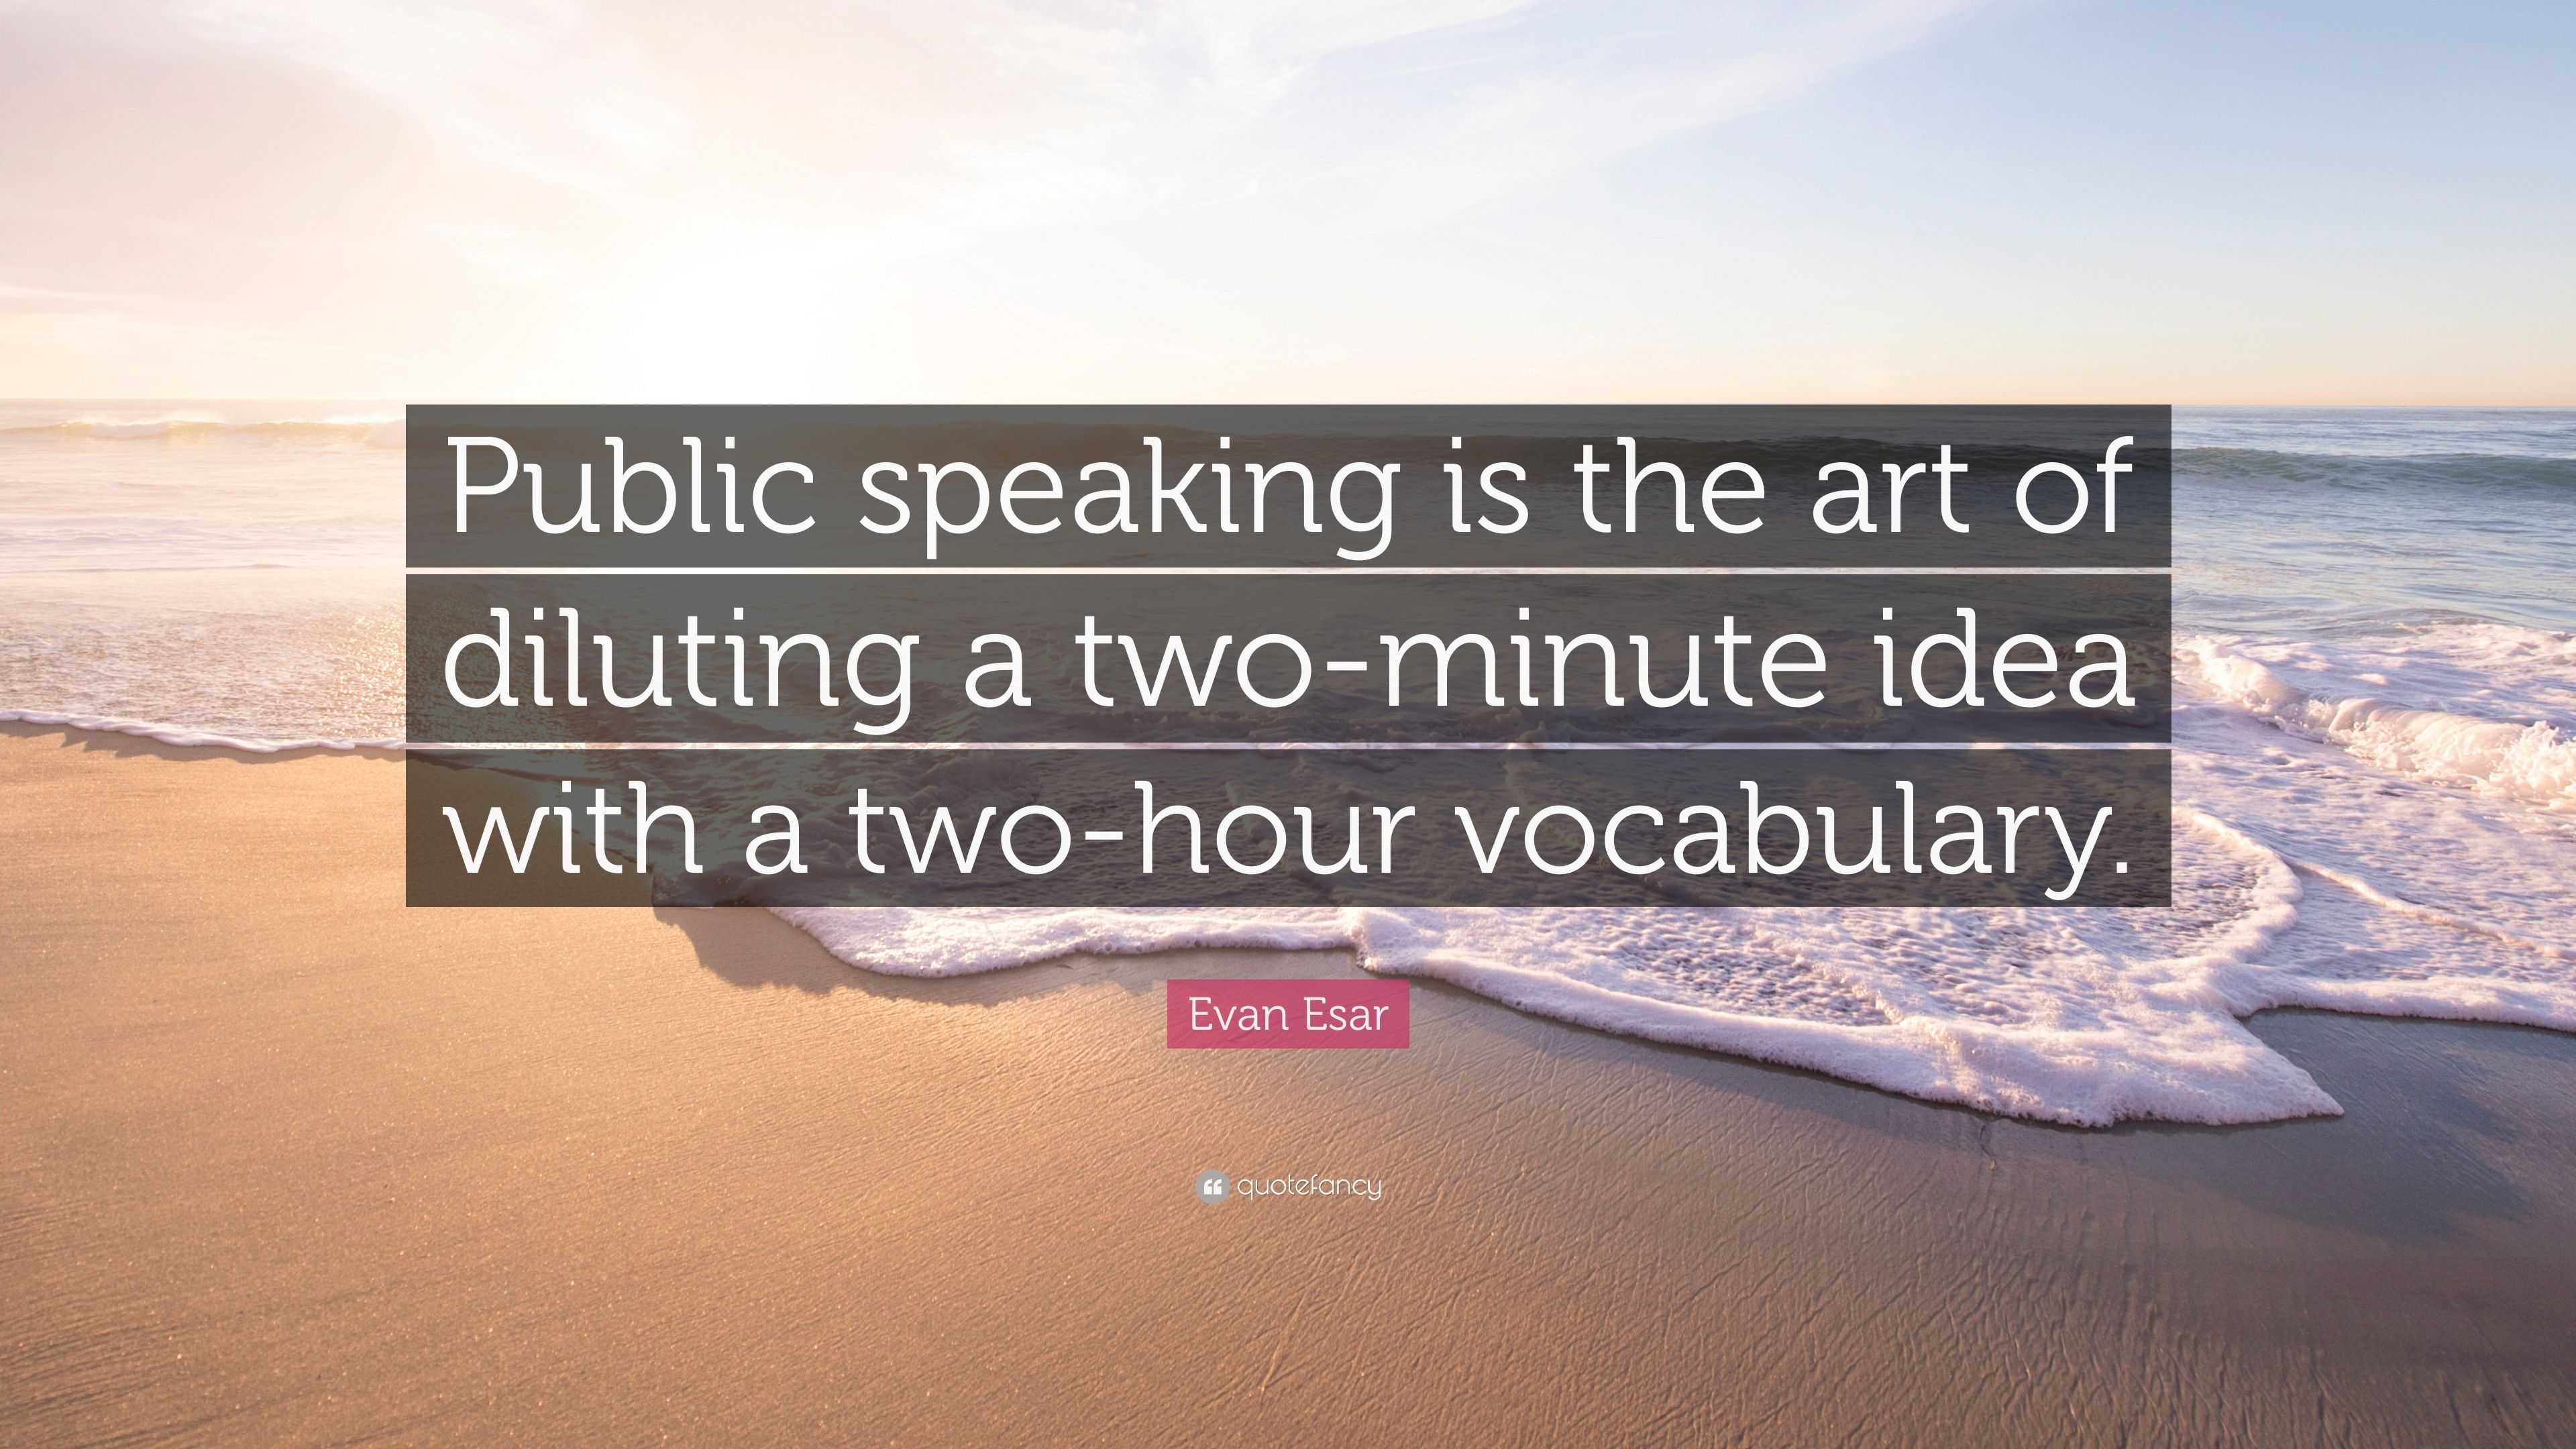 Evan Esar Quote: “Public speaking is the art of diluting a two-minute